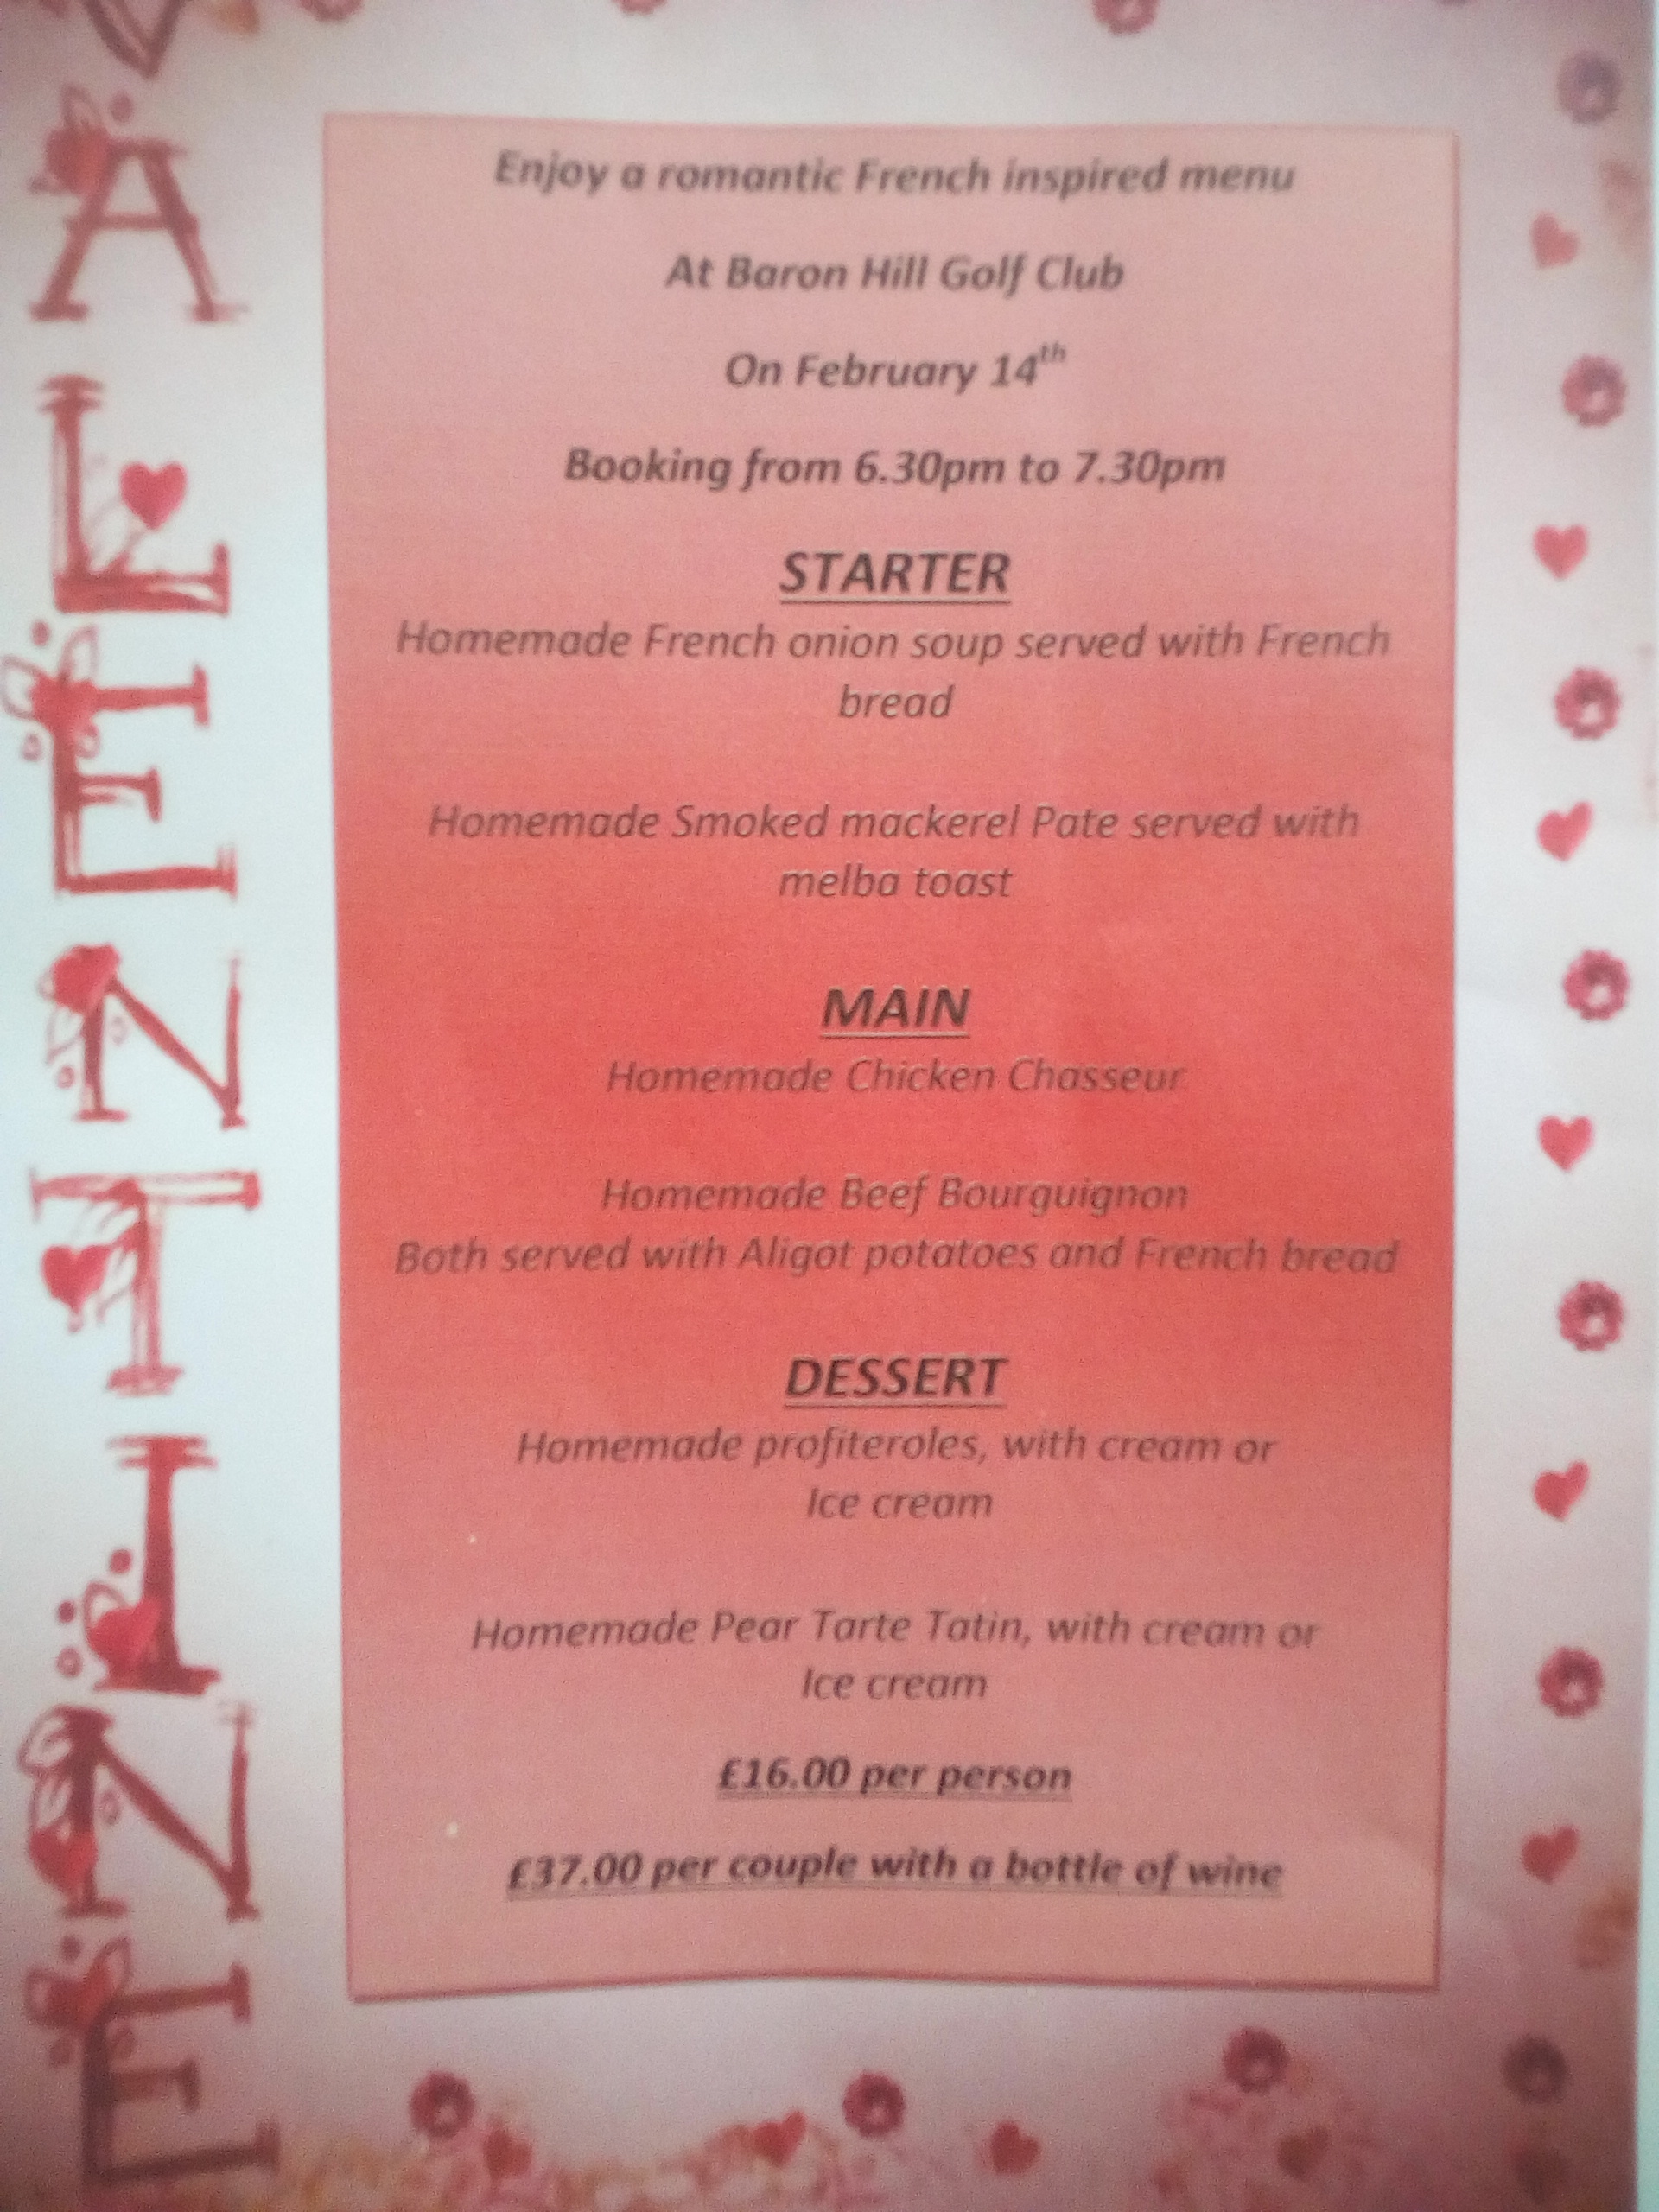 Join us at the club this Valenines for a Romantic French Inspired Menu Friday 14th February